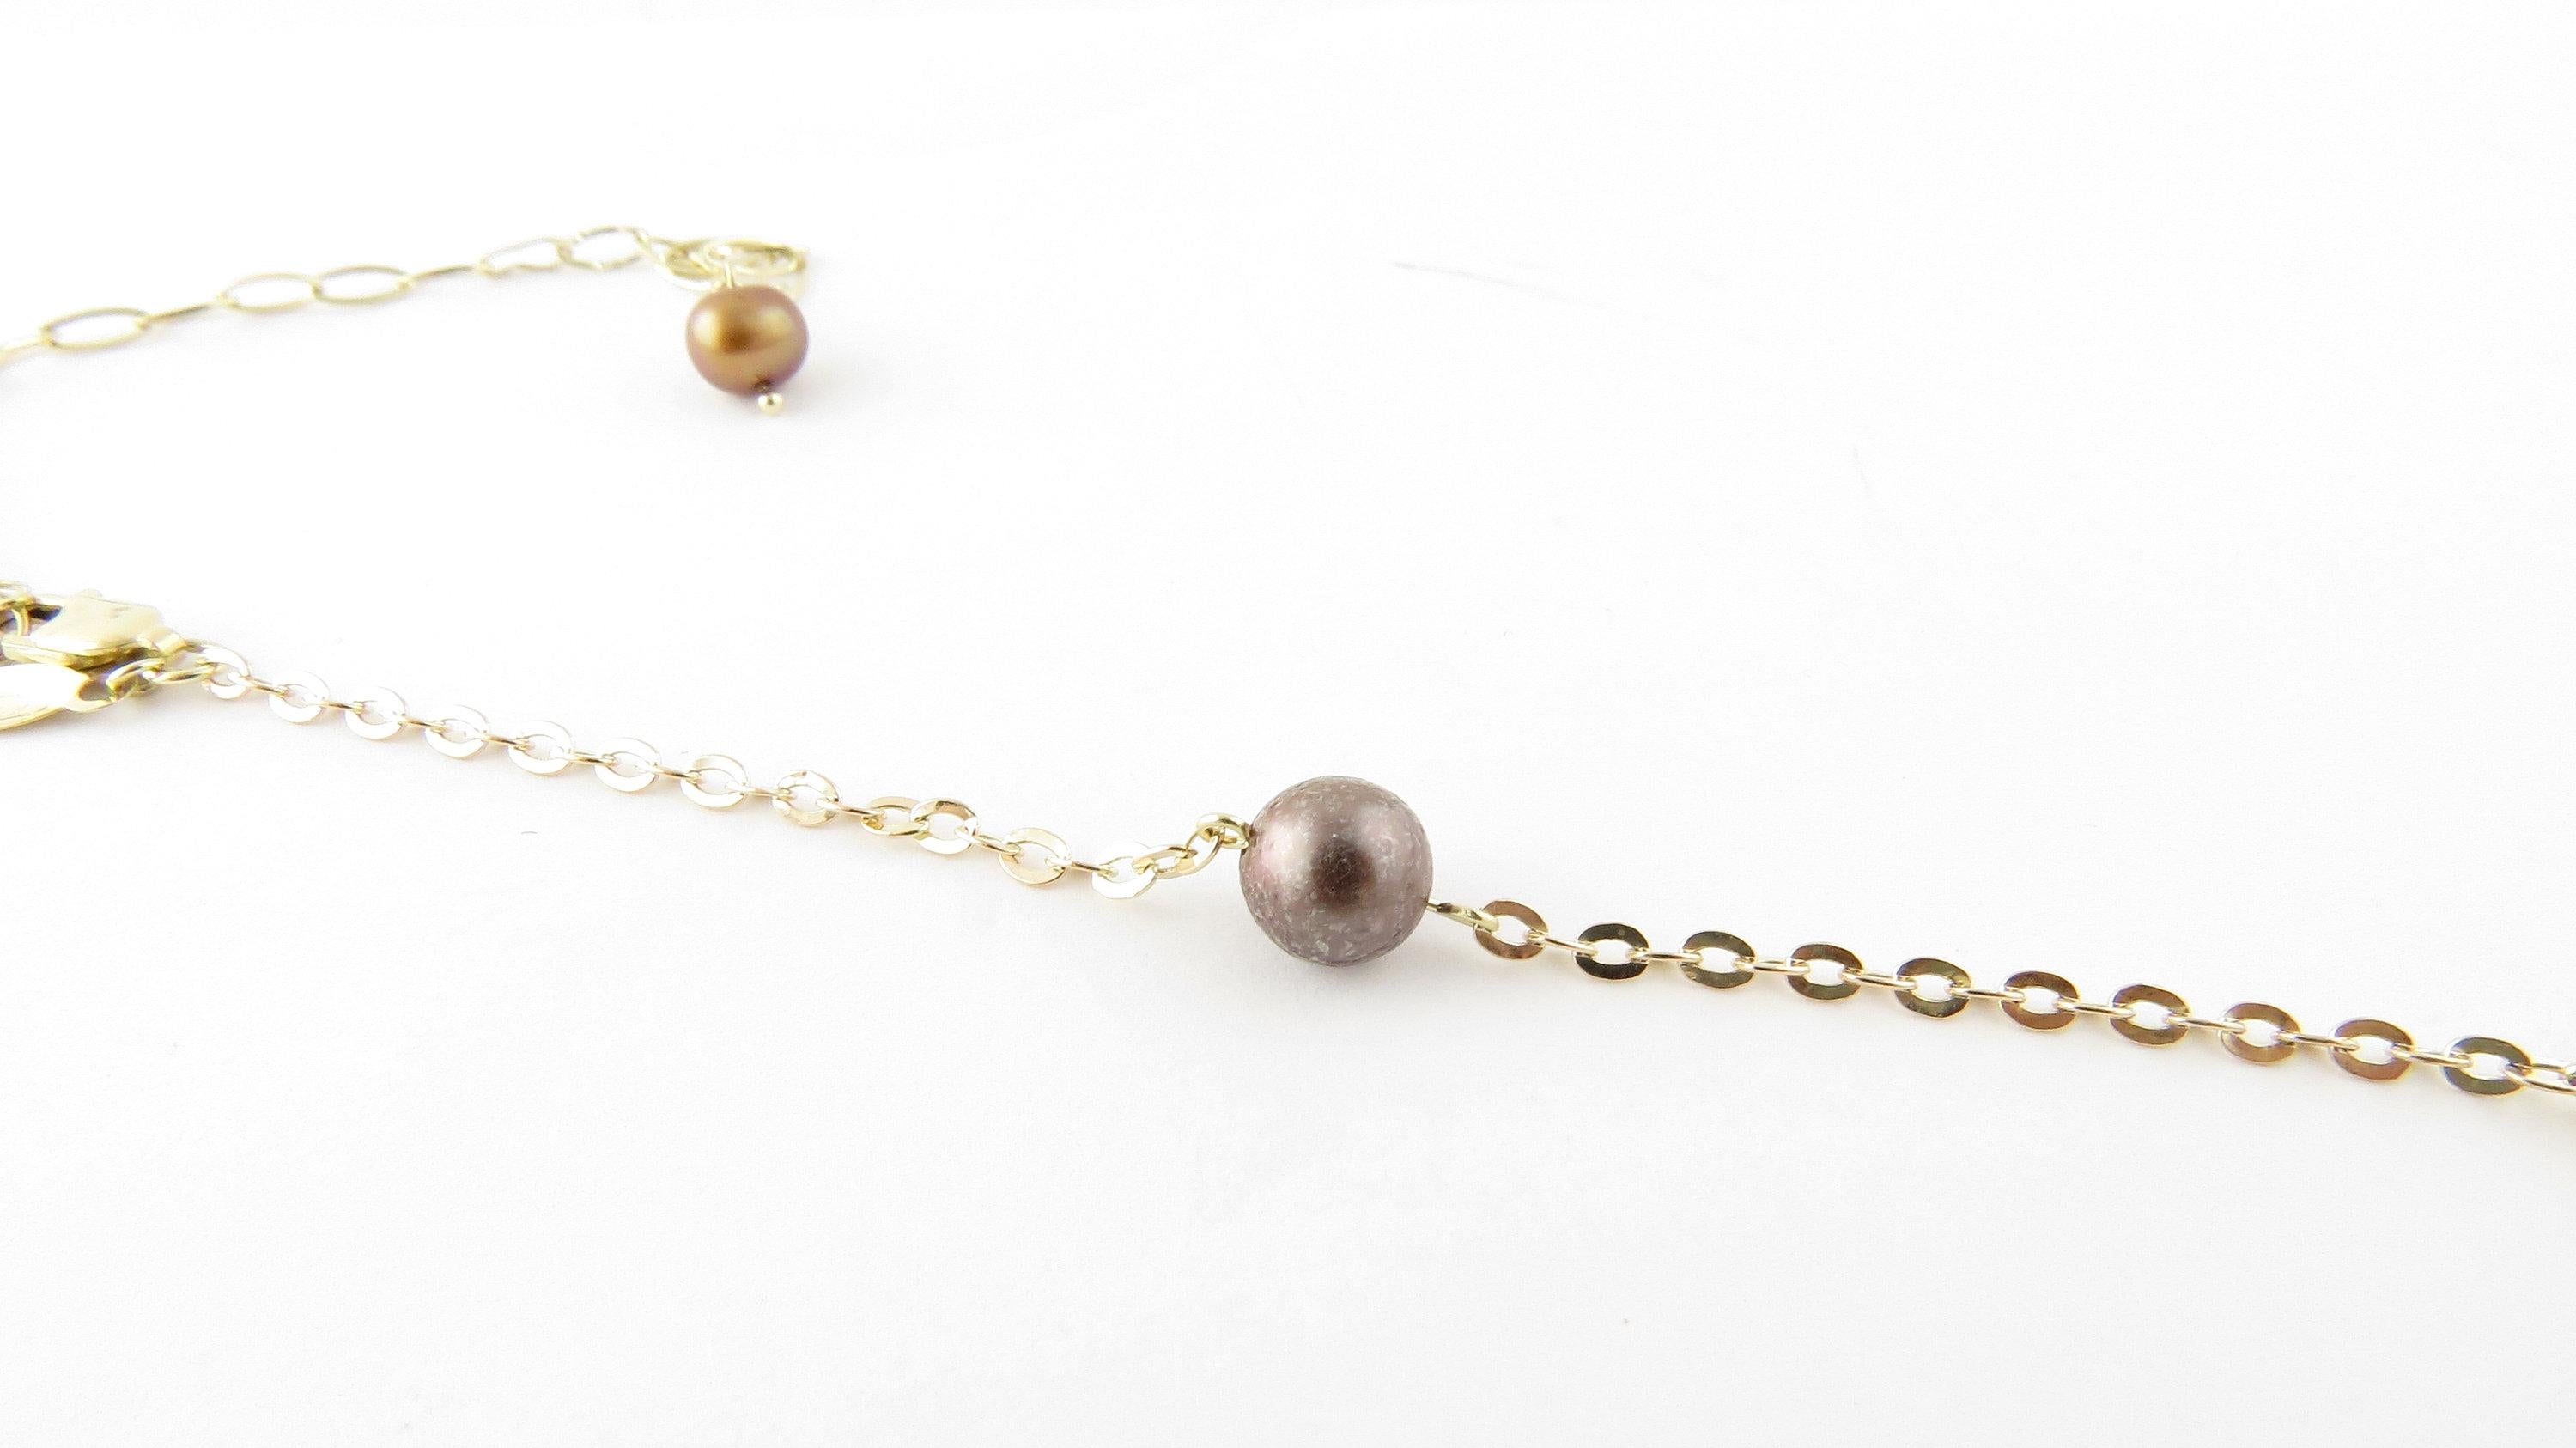 Vintage 14 Karat Yellow Gold Cultured Pearl and Citrine Necklace-

This lovely necklace features four briolette cut citrines quartzes, and 6 cultured dyed fresh water pearls measuring 6-7mm   Set on a classic 14K yellow gold chain.

Citrines total